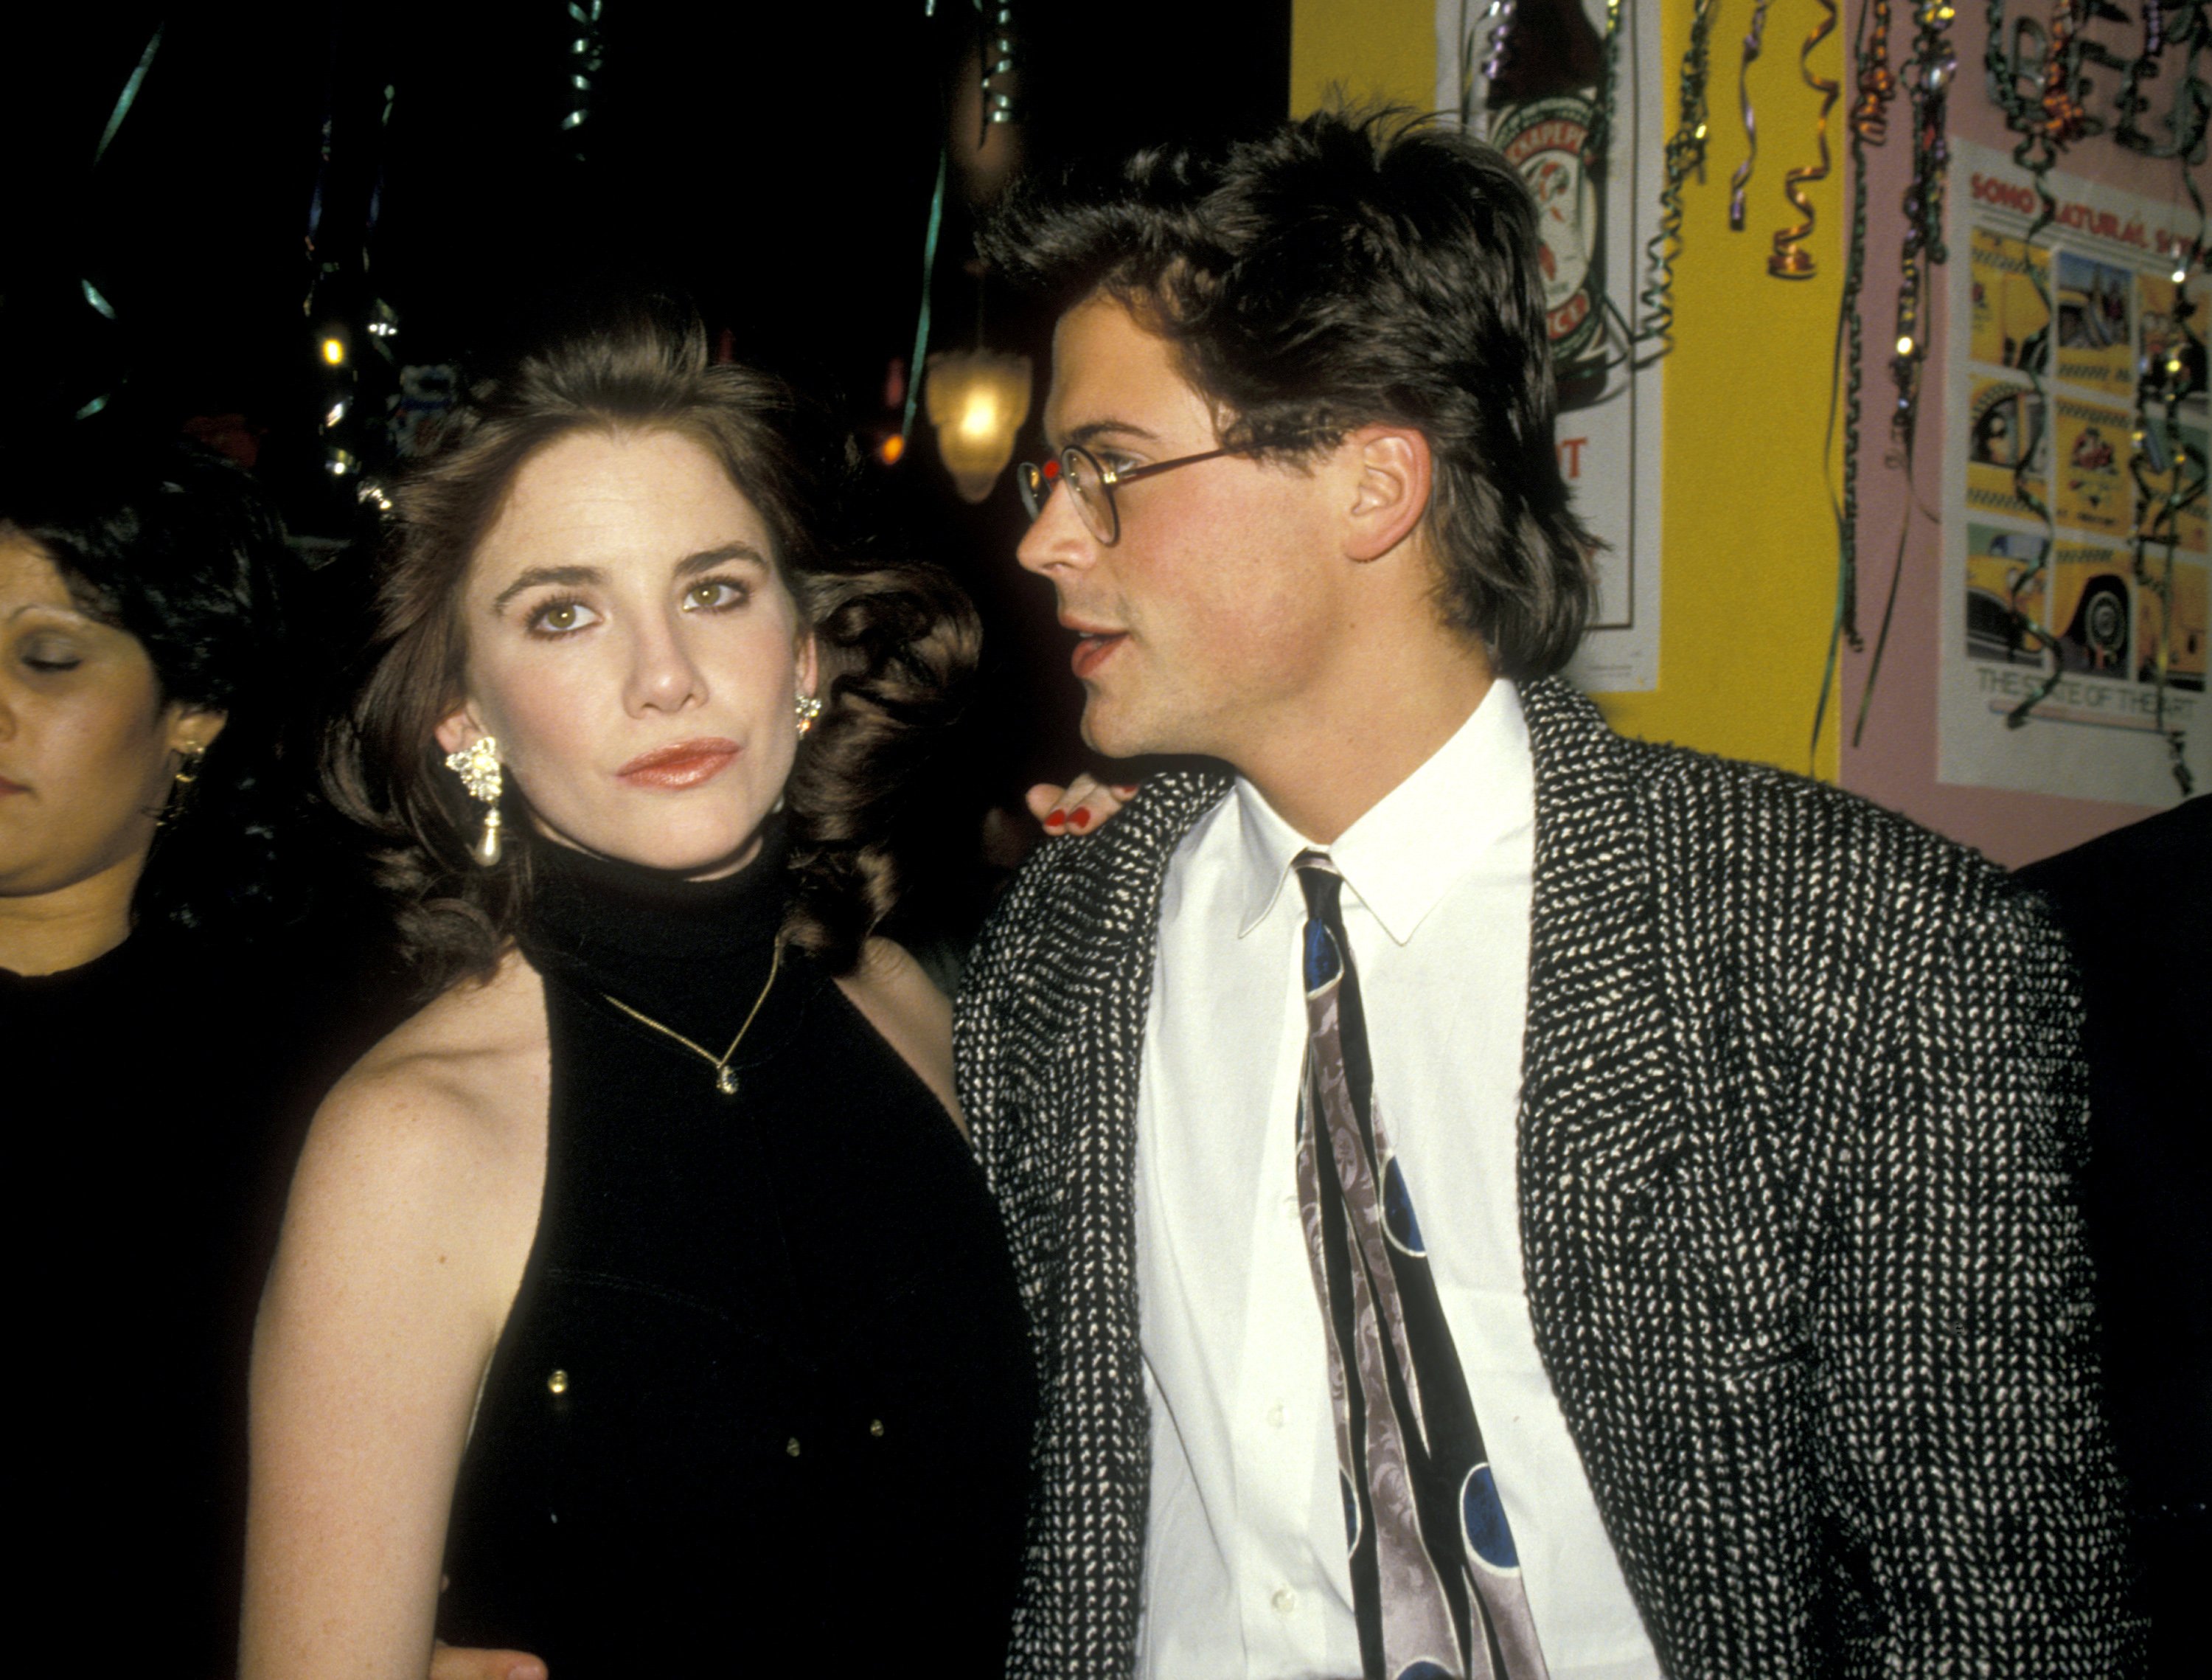 Melissa Gilbert and Rob Lowe at the "A Shayna Maidel" Off Broadway Opening Night on October 28, 1987 